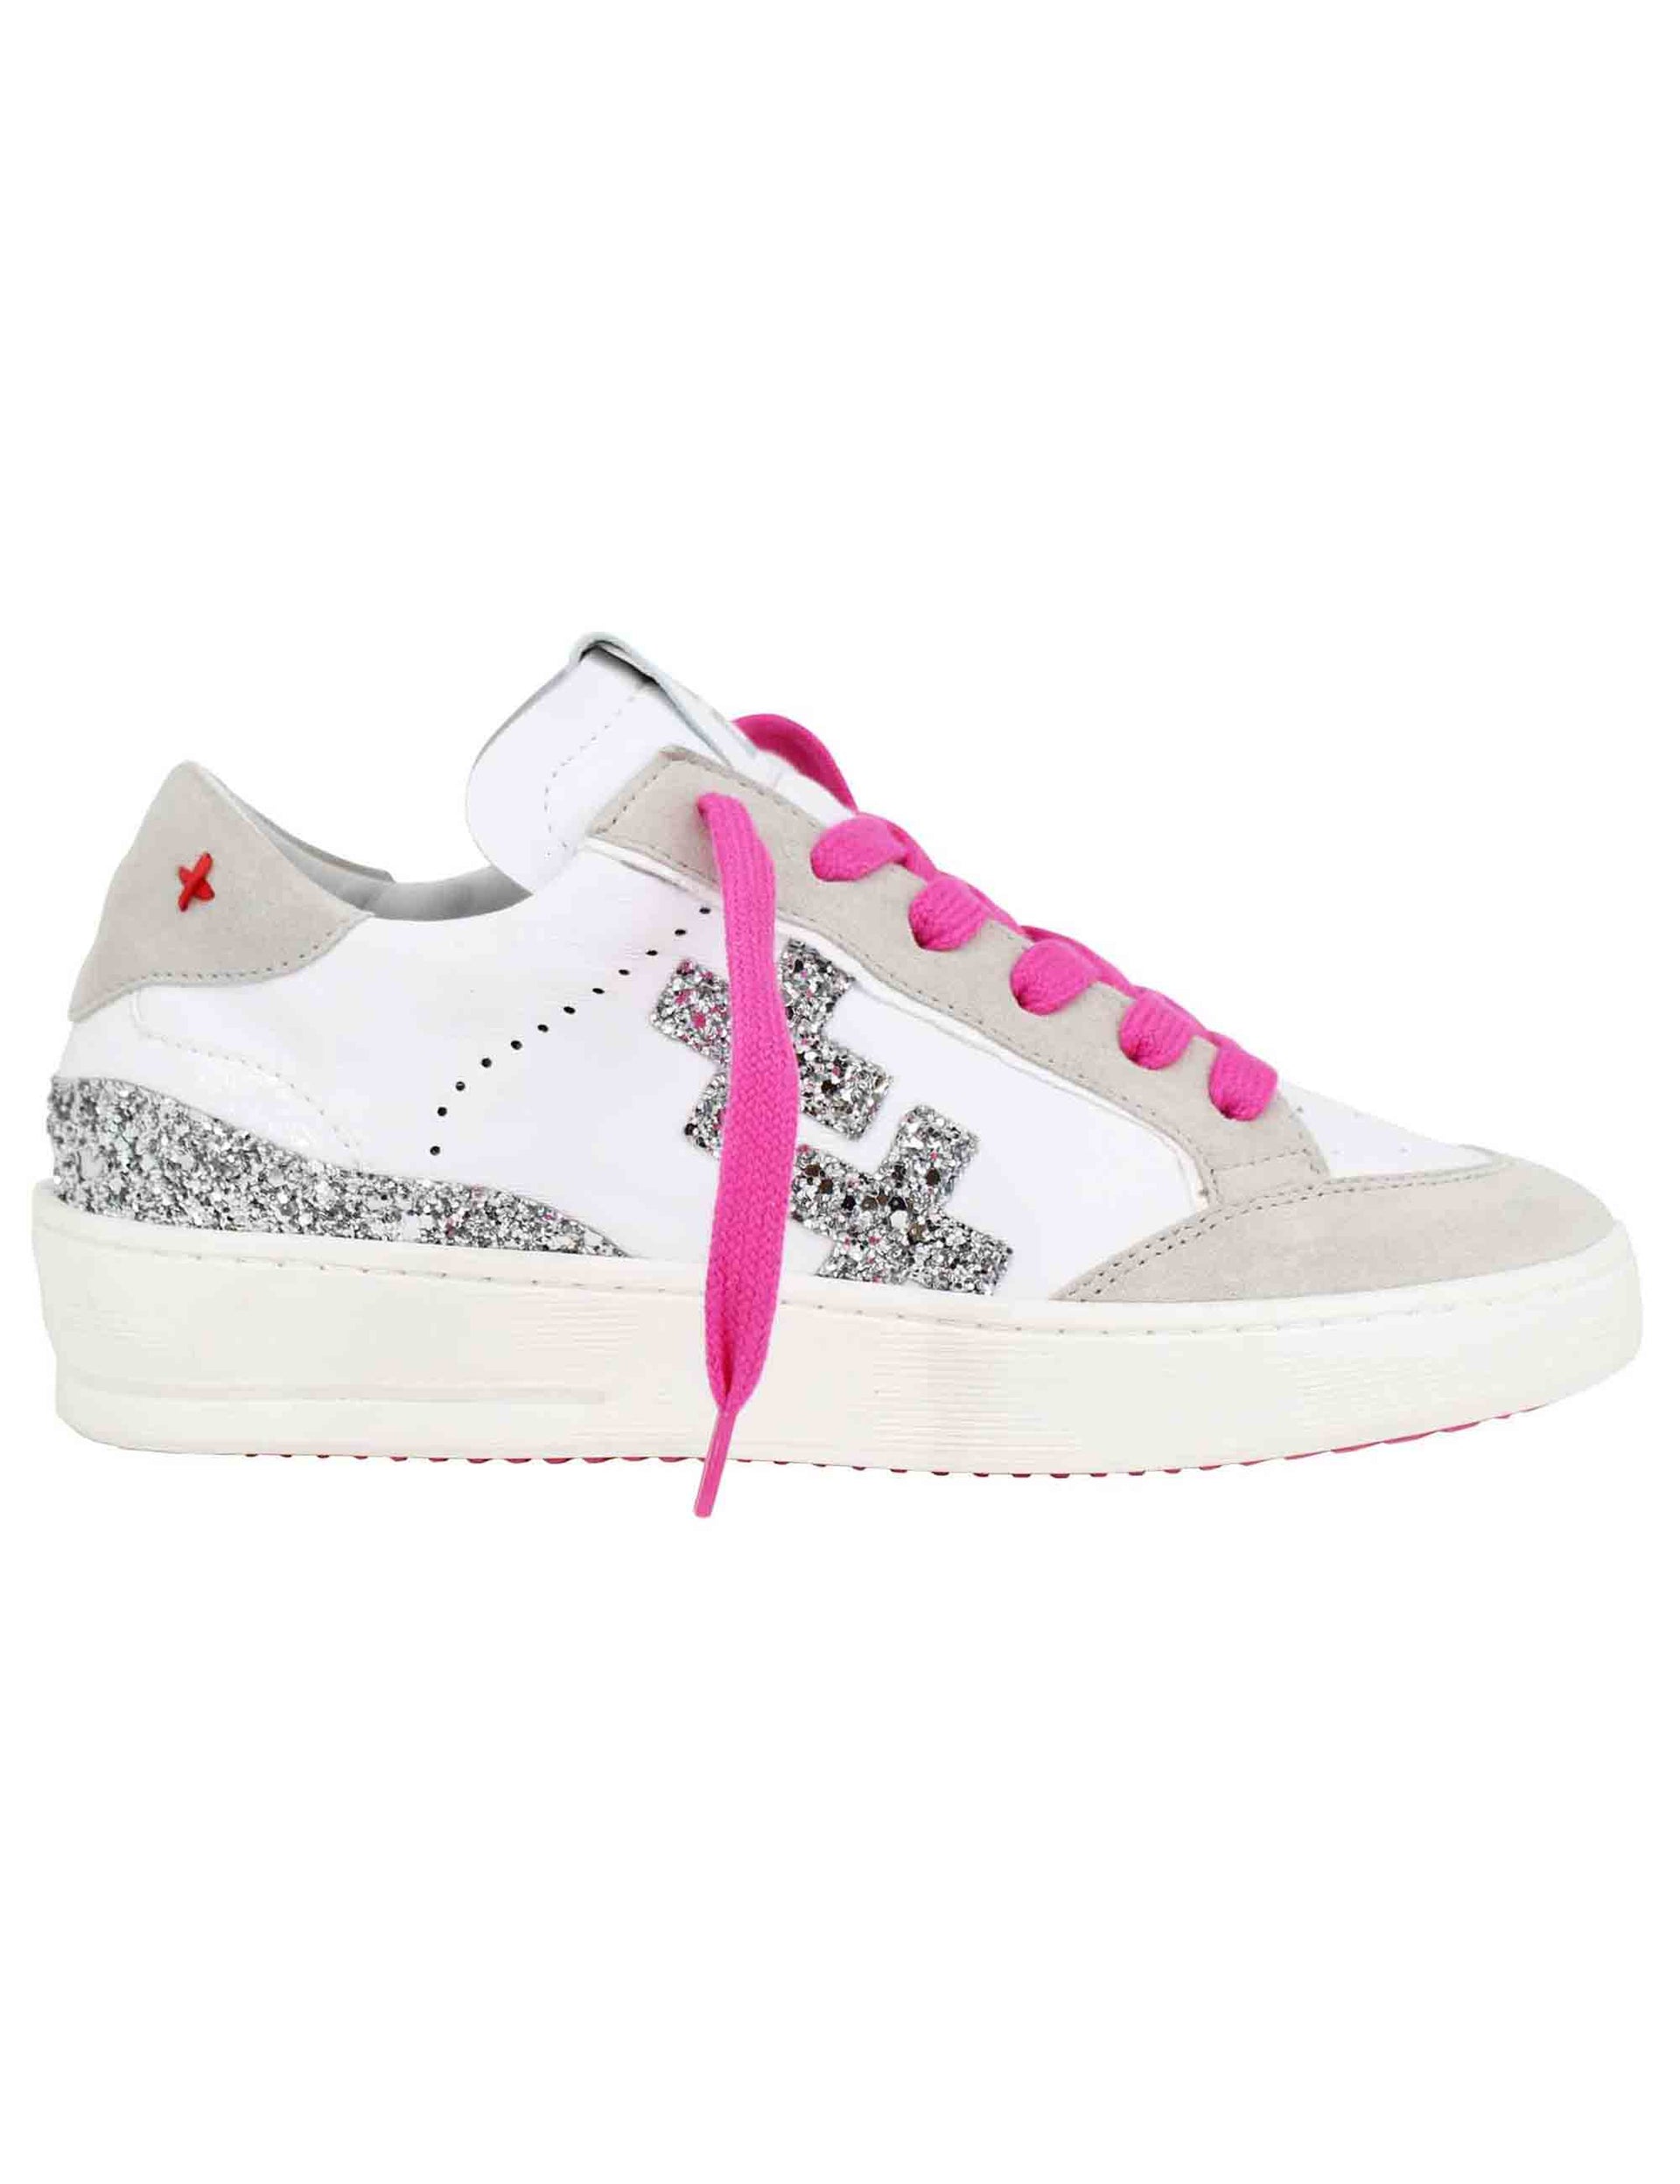 Women's white leather sneakers with silver glitter inserts